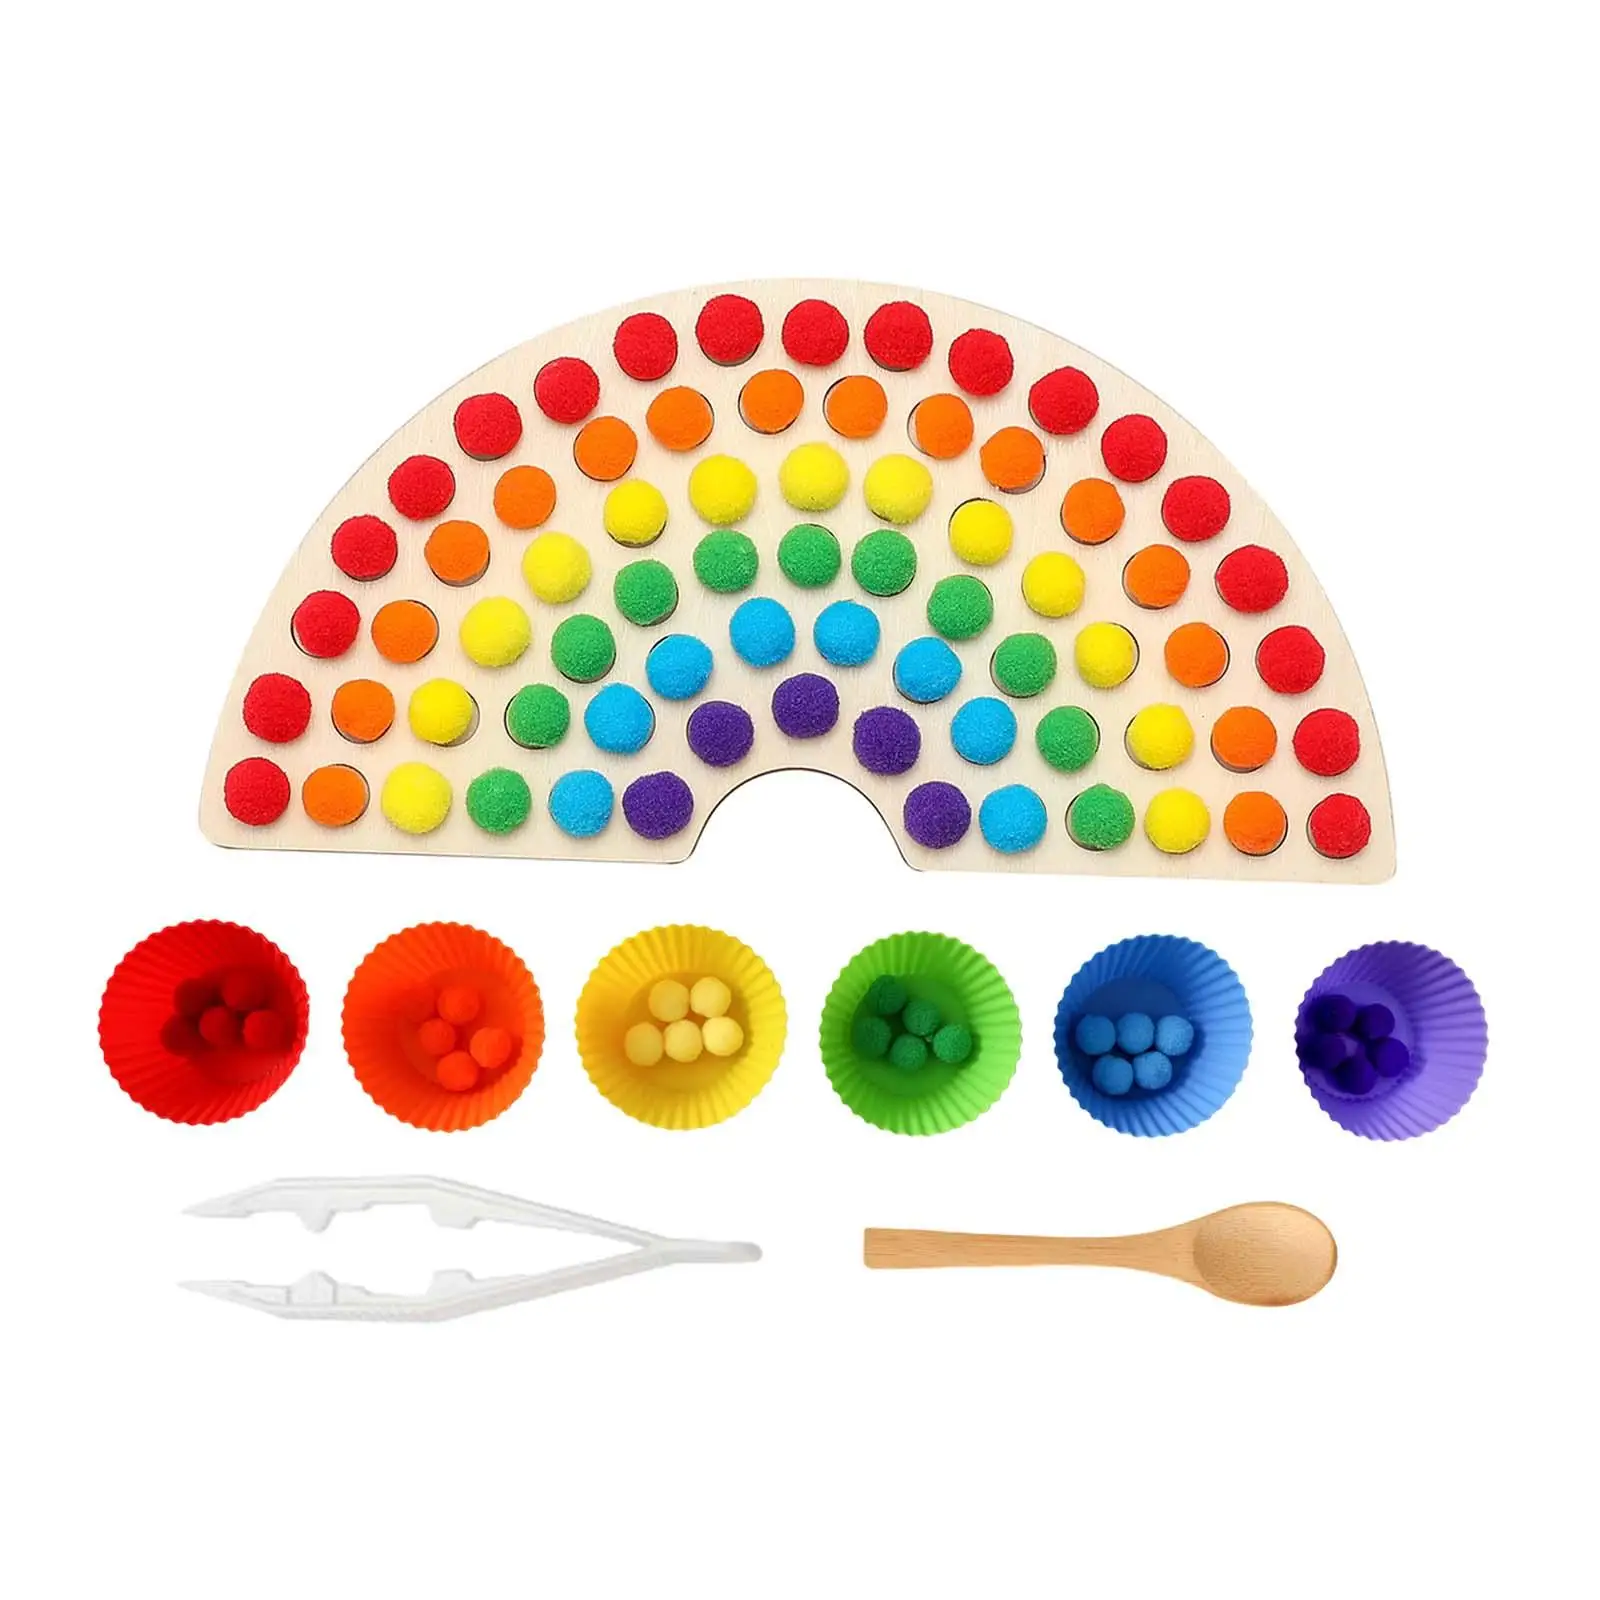 Wooden Peg Board Bead Game Color Recognition Learning Activity Montessori Color Matching and Sorting for Age 3+ Year Old